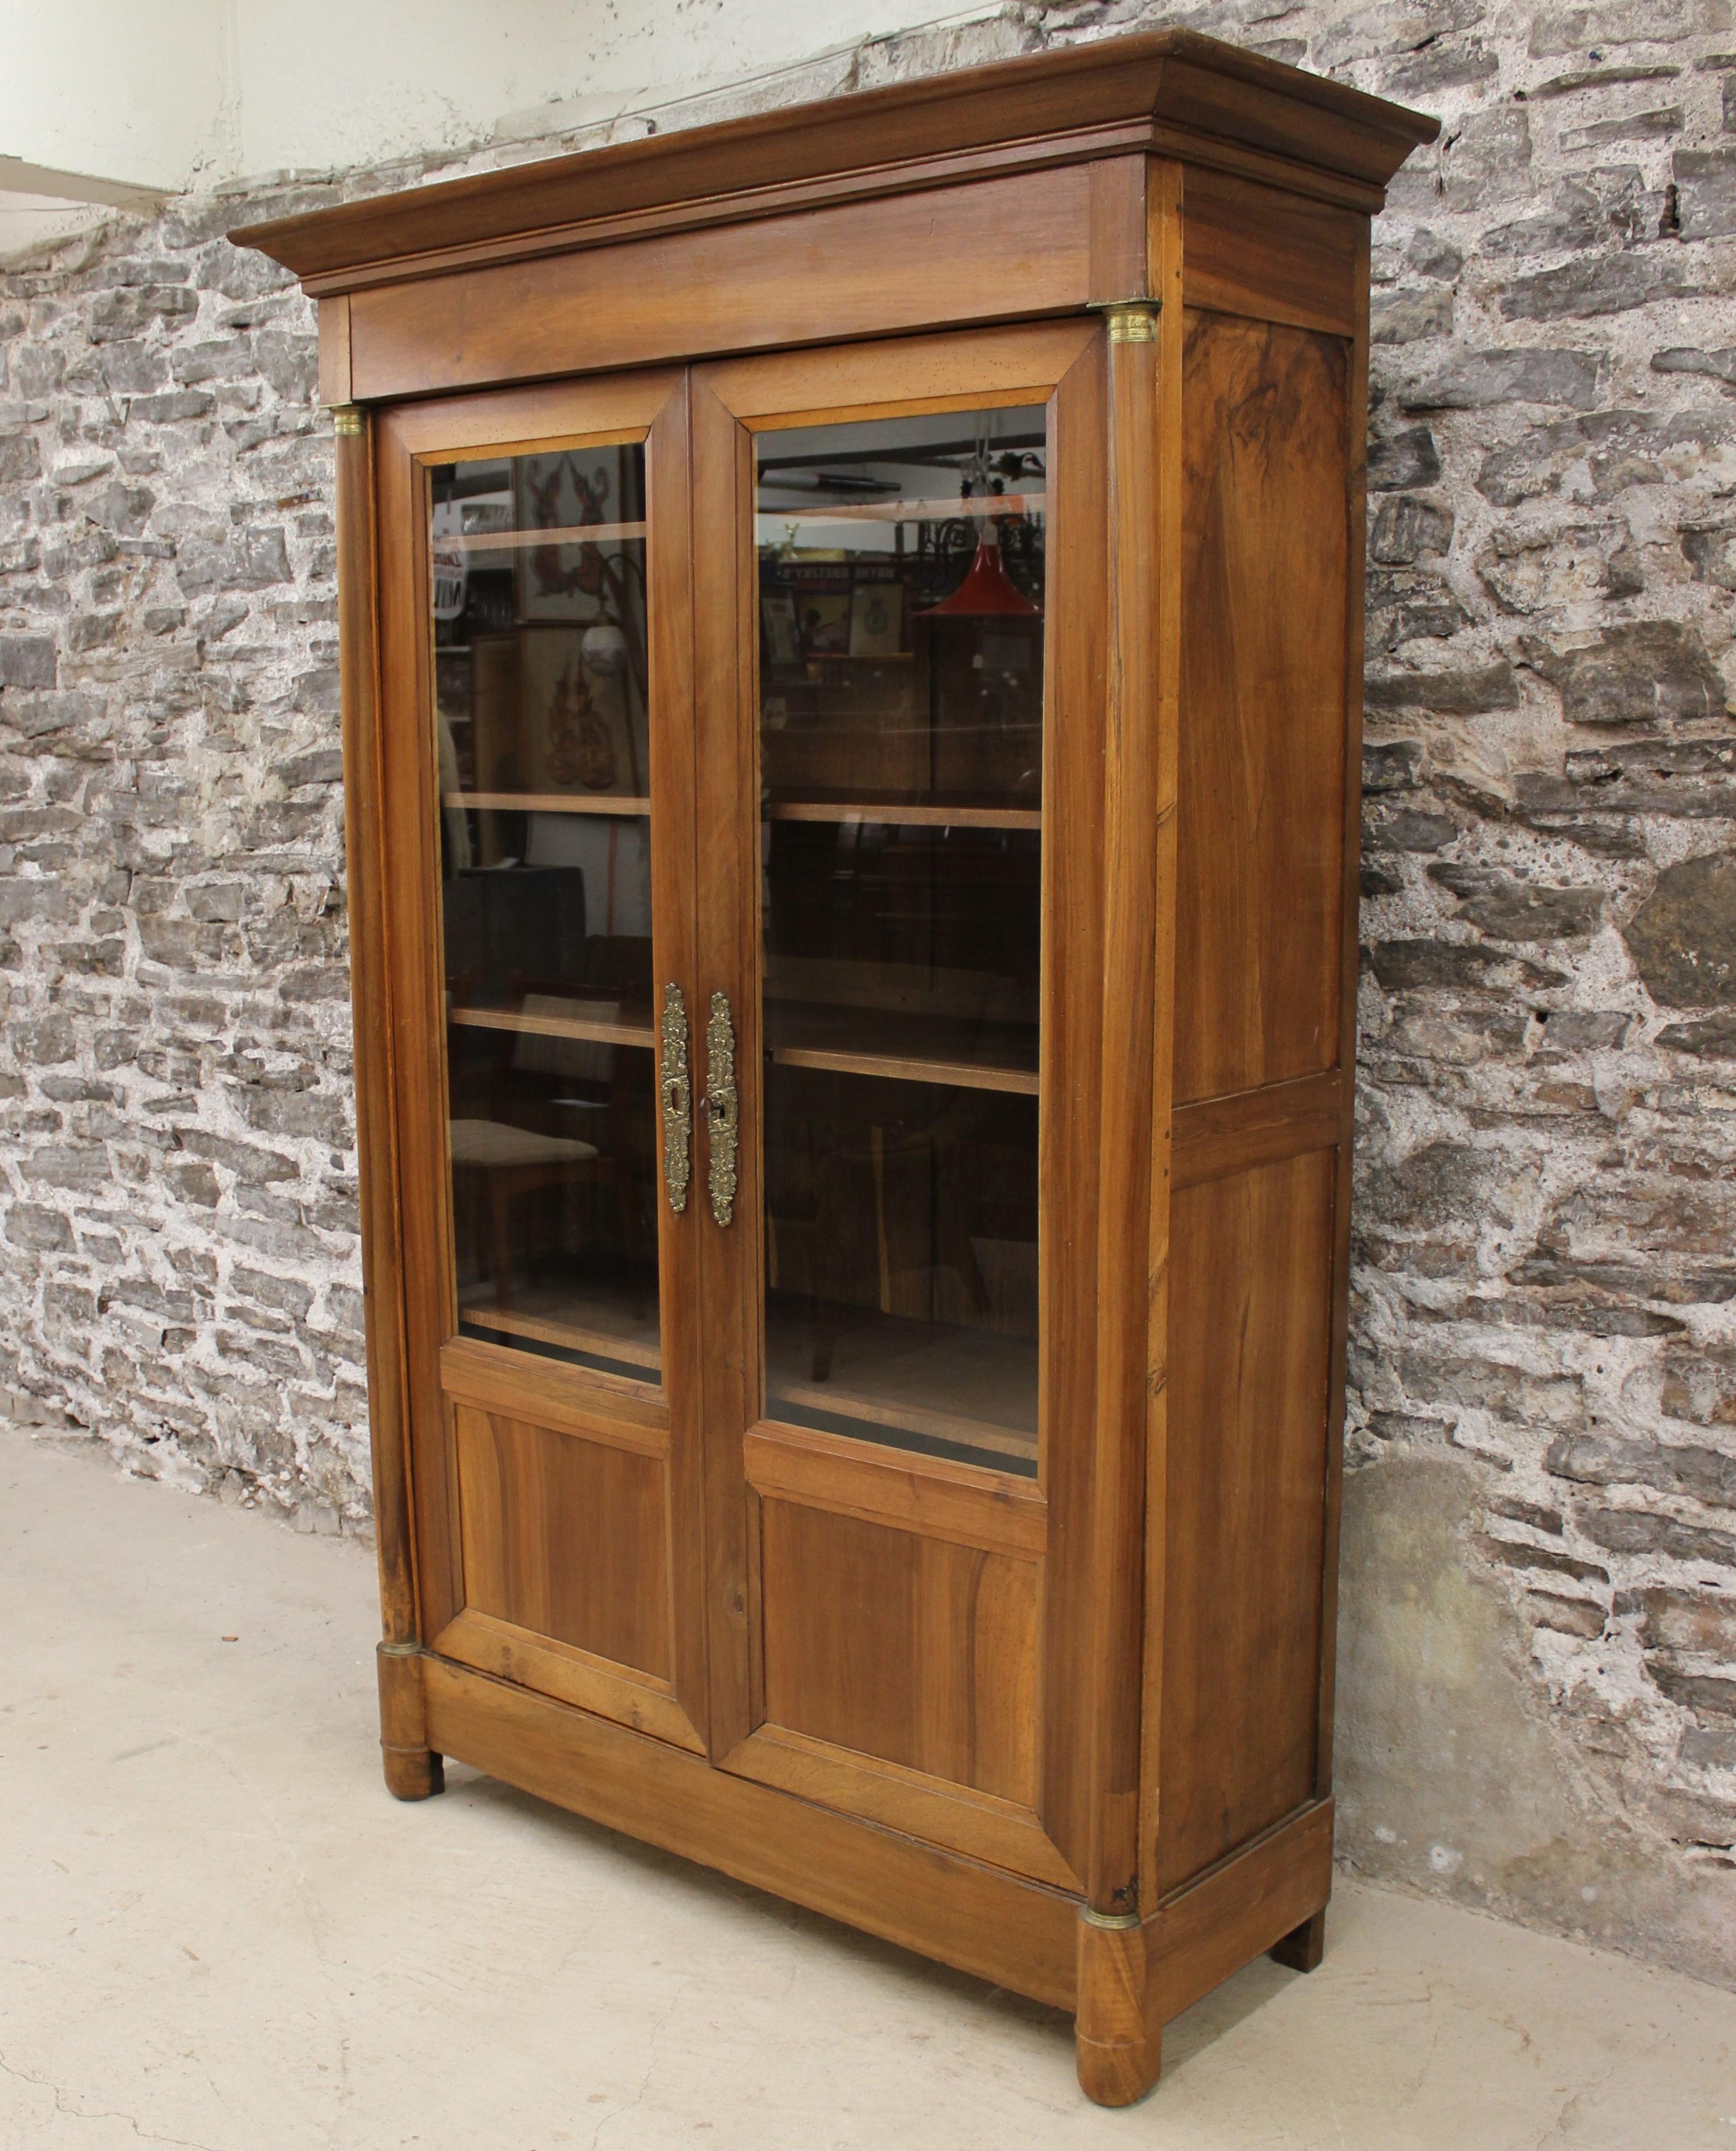 This 19th century French Empire style walnut cabinet features two-door, bronze accents and highlights and provides ample storage. This would be a perfect fit for either a kitchen or library.